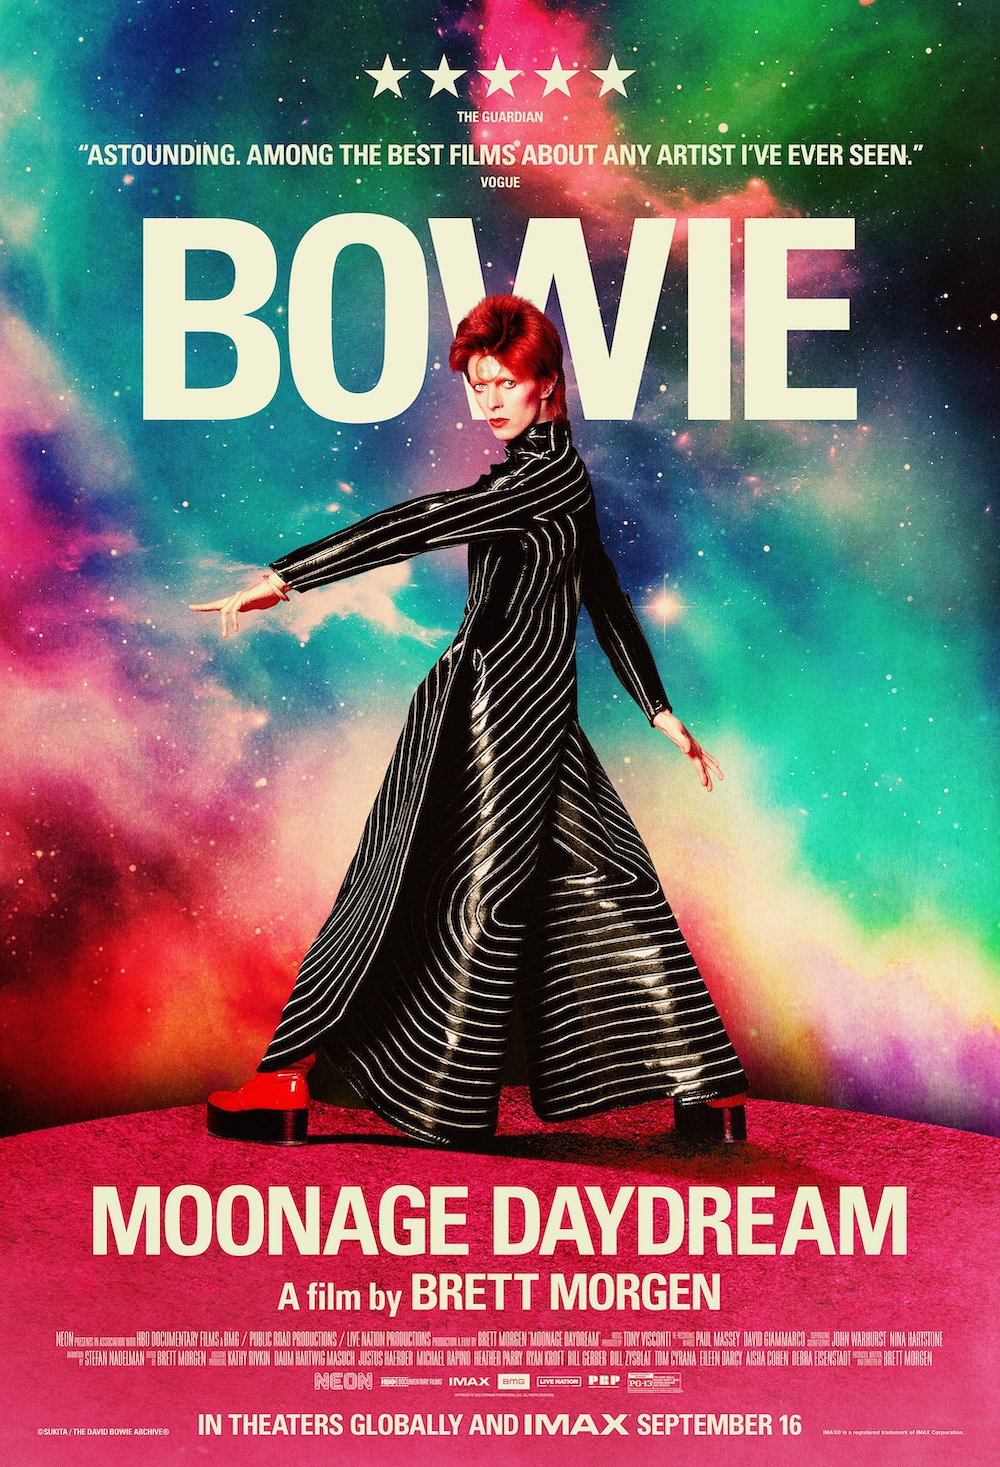 MOONAGE DAYDREAM, the life and genius of David Bowie hits the big screen this September